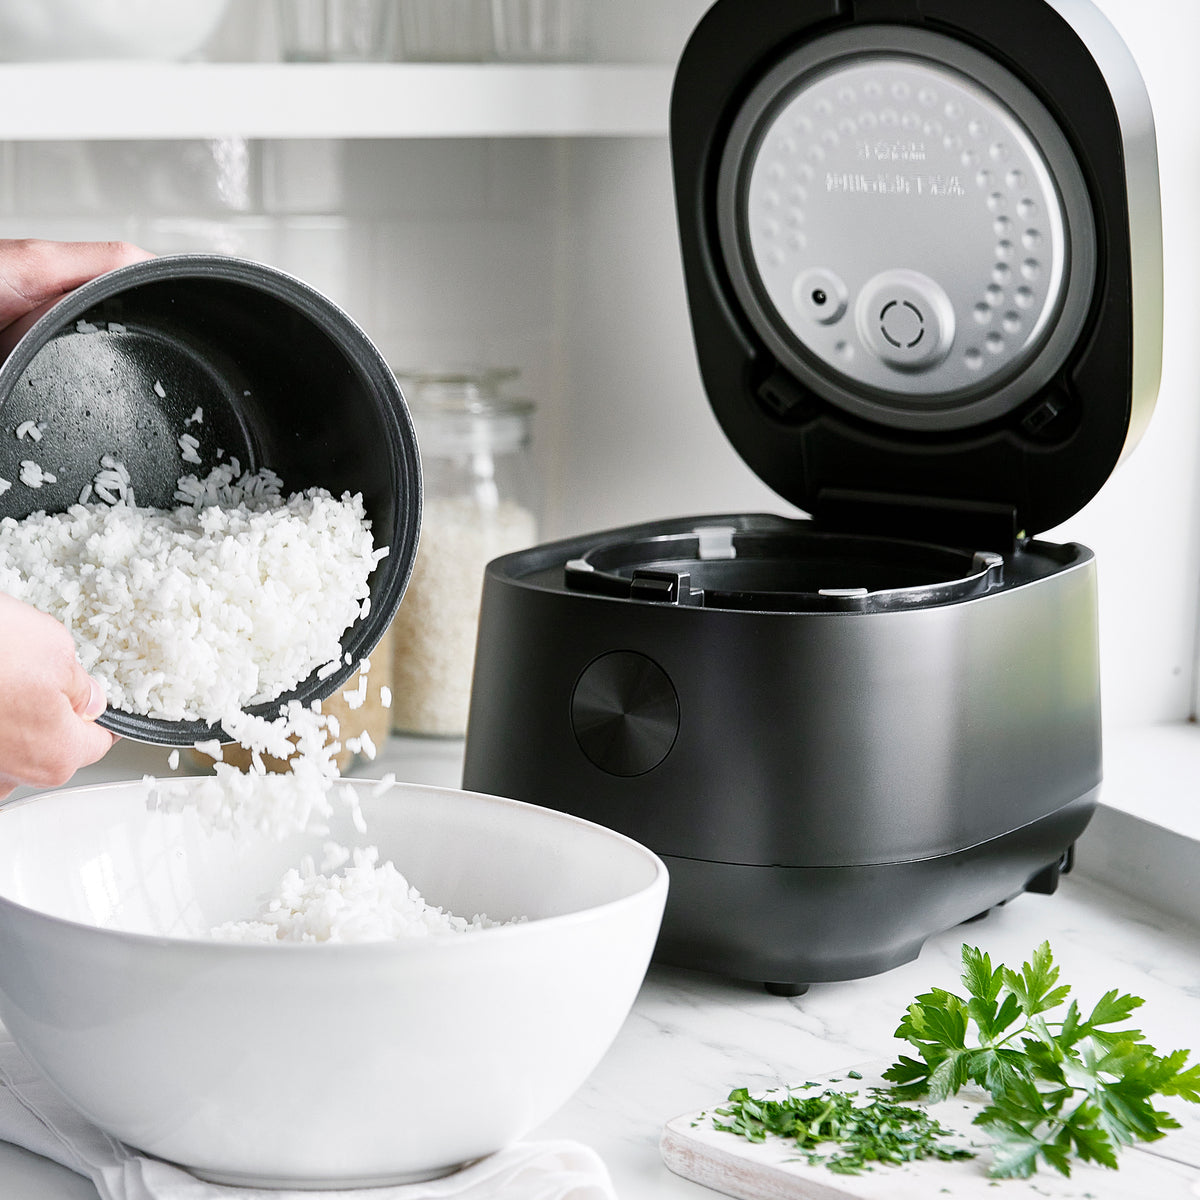 GreenPan 8-Cup Elite Induction Rice Cooker